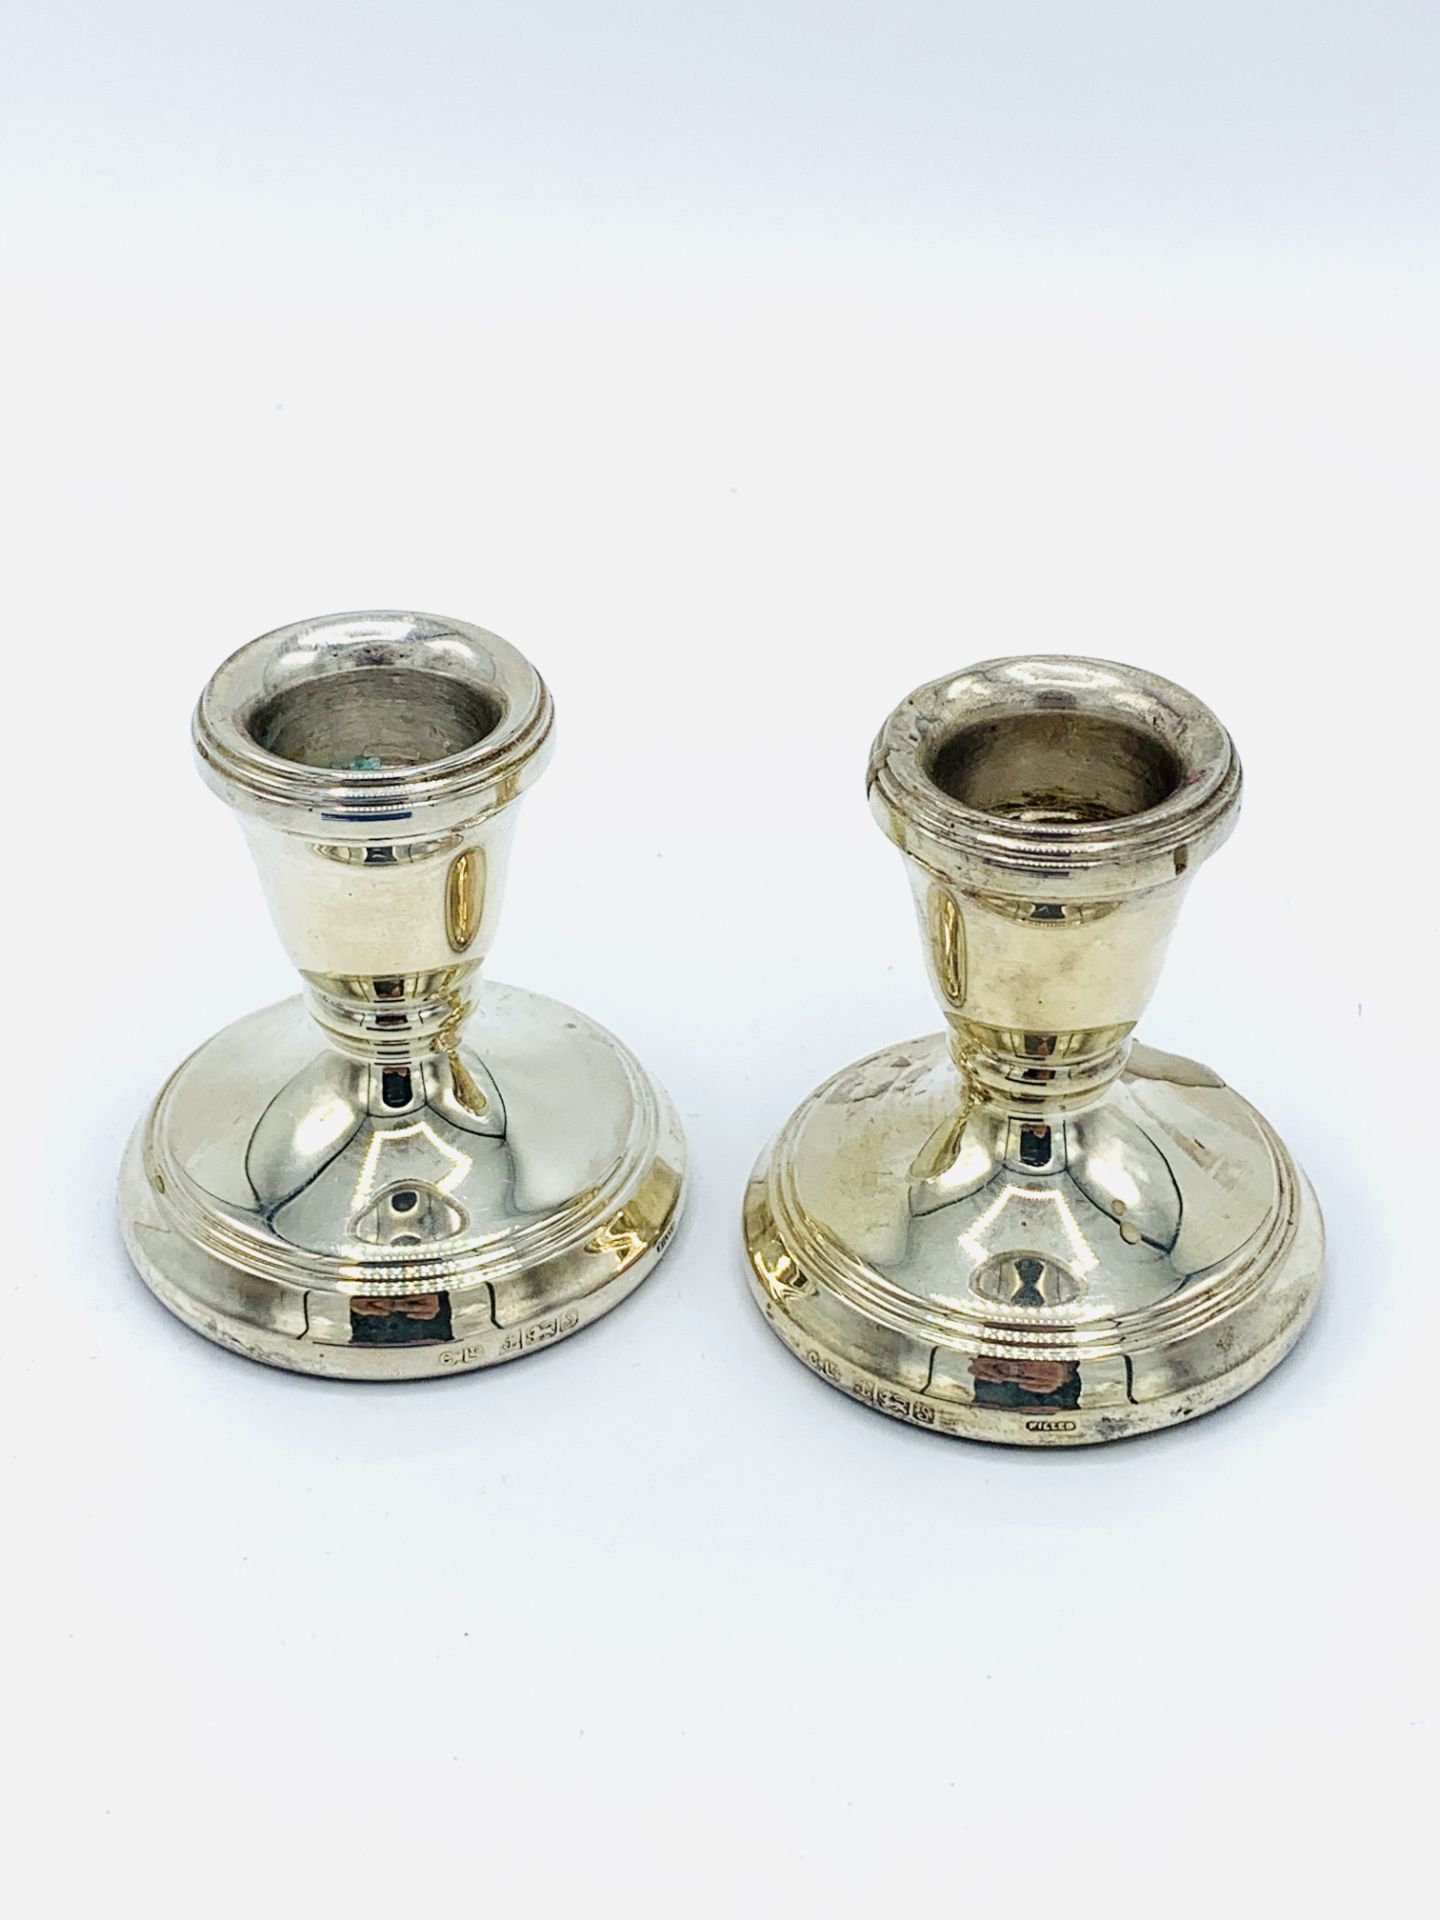 Boxed pair of short sterling silver candle sticks - Image 2 of 2